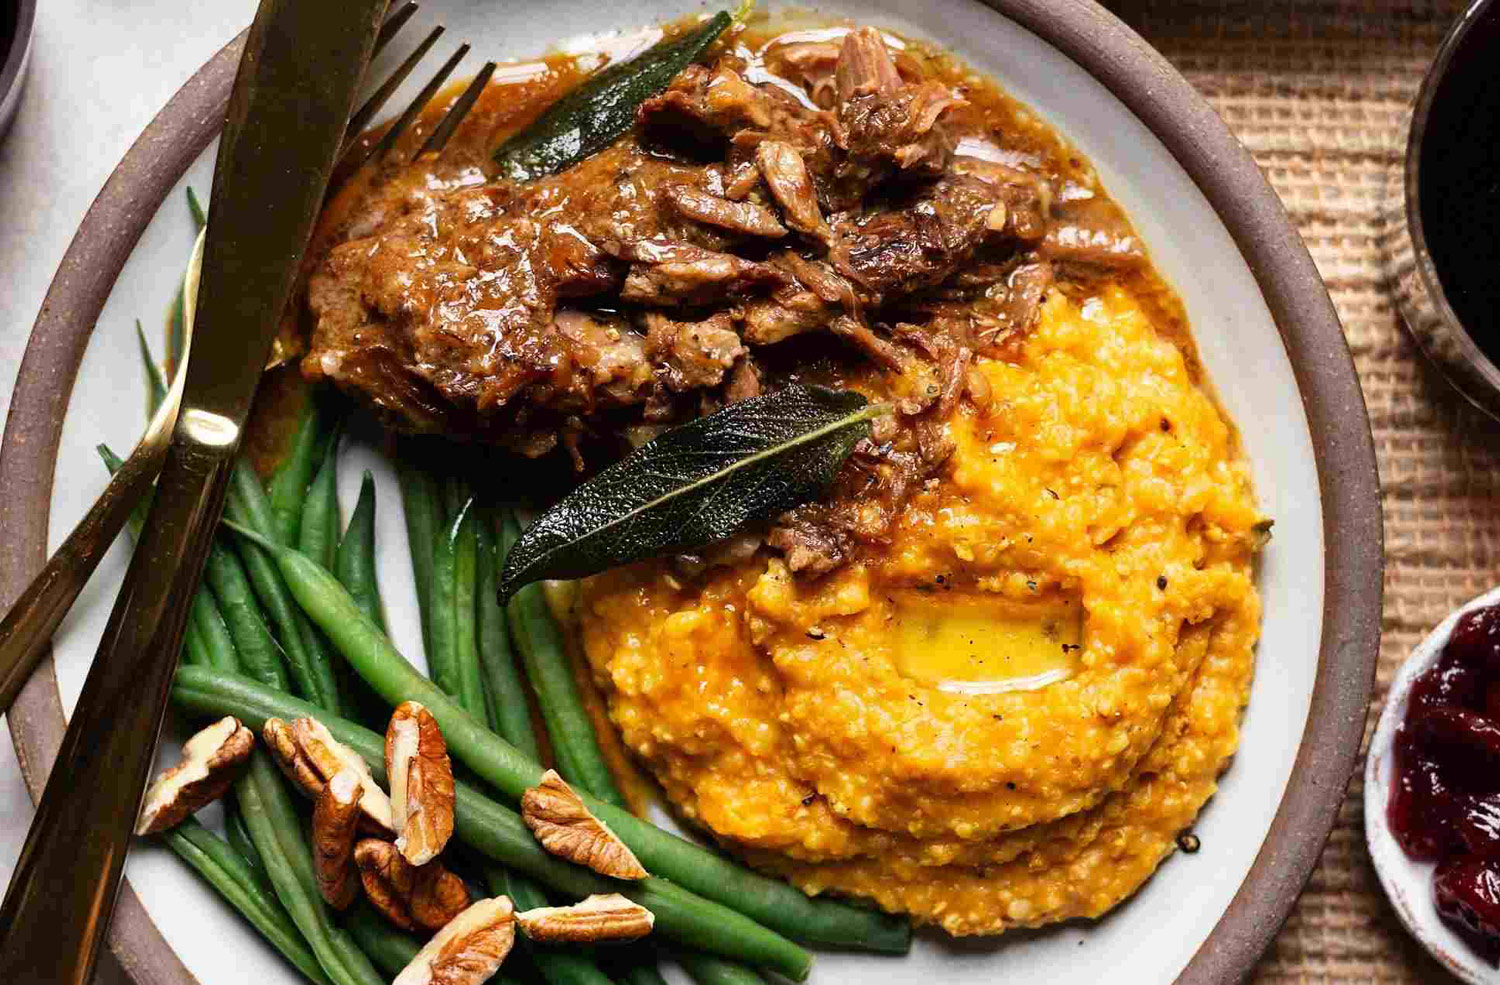 Braised Lamb Shoulder with Pumpkin Smoked Gouda Grits